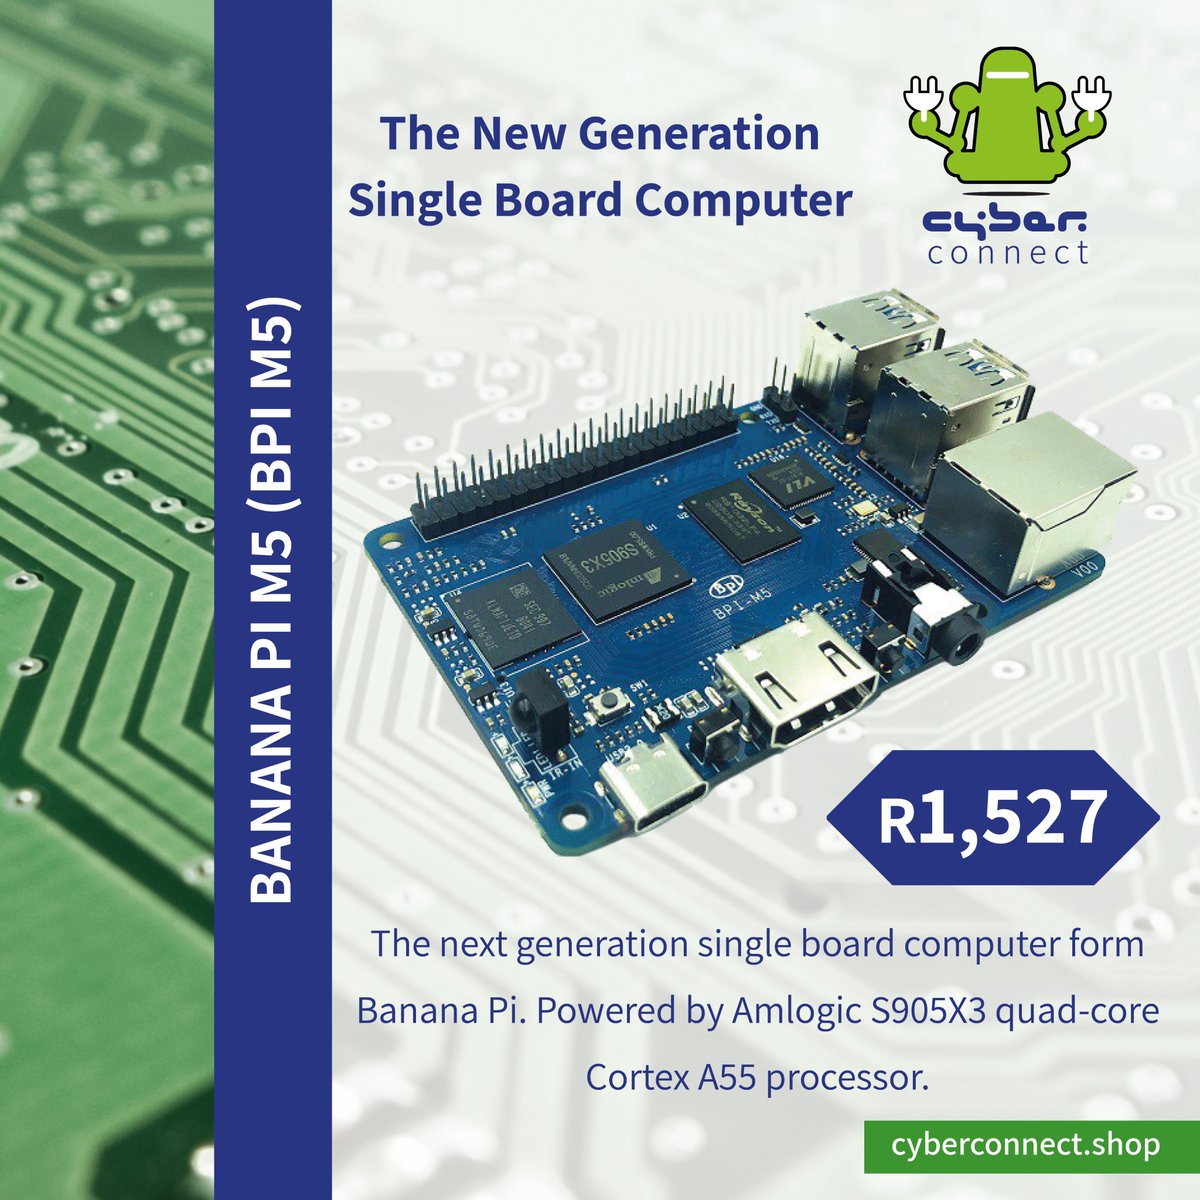 There is just so much of banana pi to discover. Request a Quote or save time and Shop Online. Get in touch ☎011 781 8014 cyberconnect.shop/shop #SingleBoardComputer #DevelopmentBoard #Storage #Network